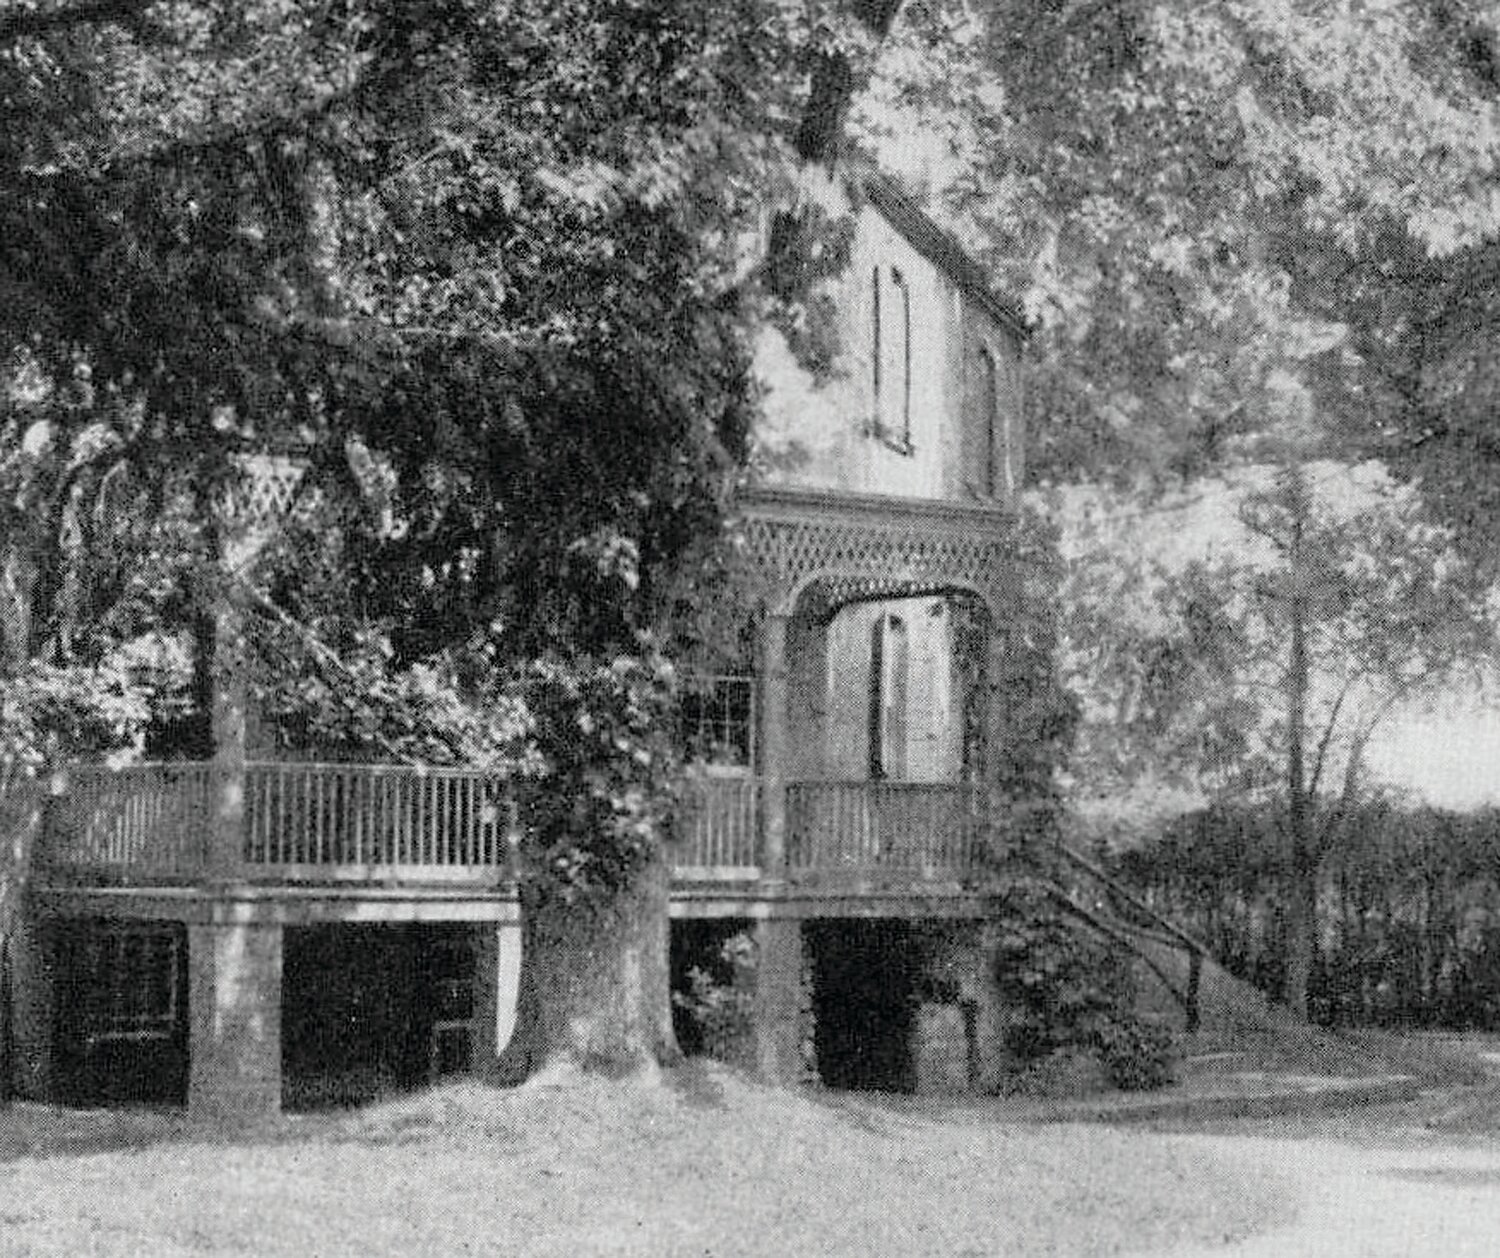 A 1917 photograph of a rear view of Cintra shows lattice work on the porch.